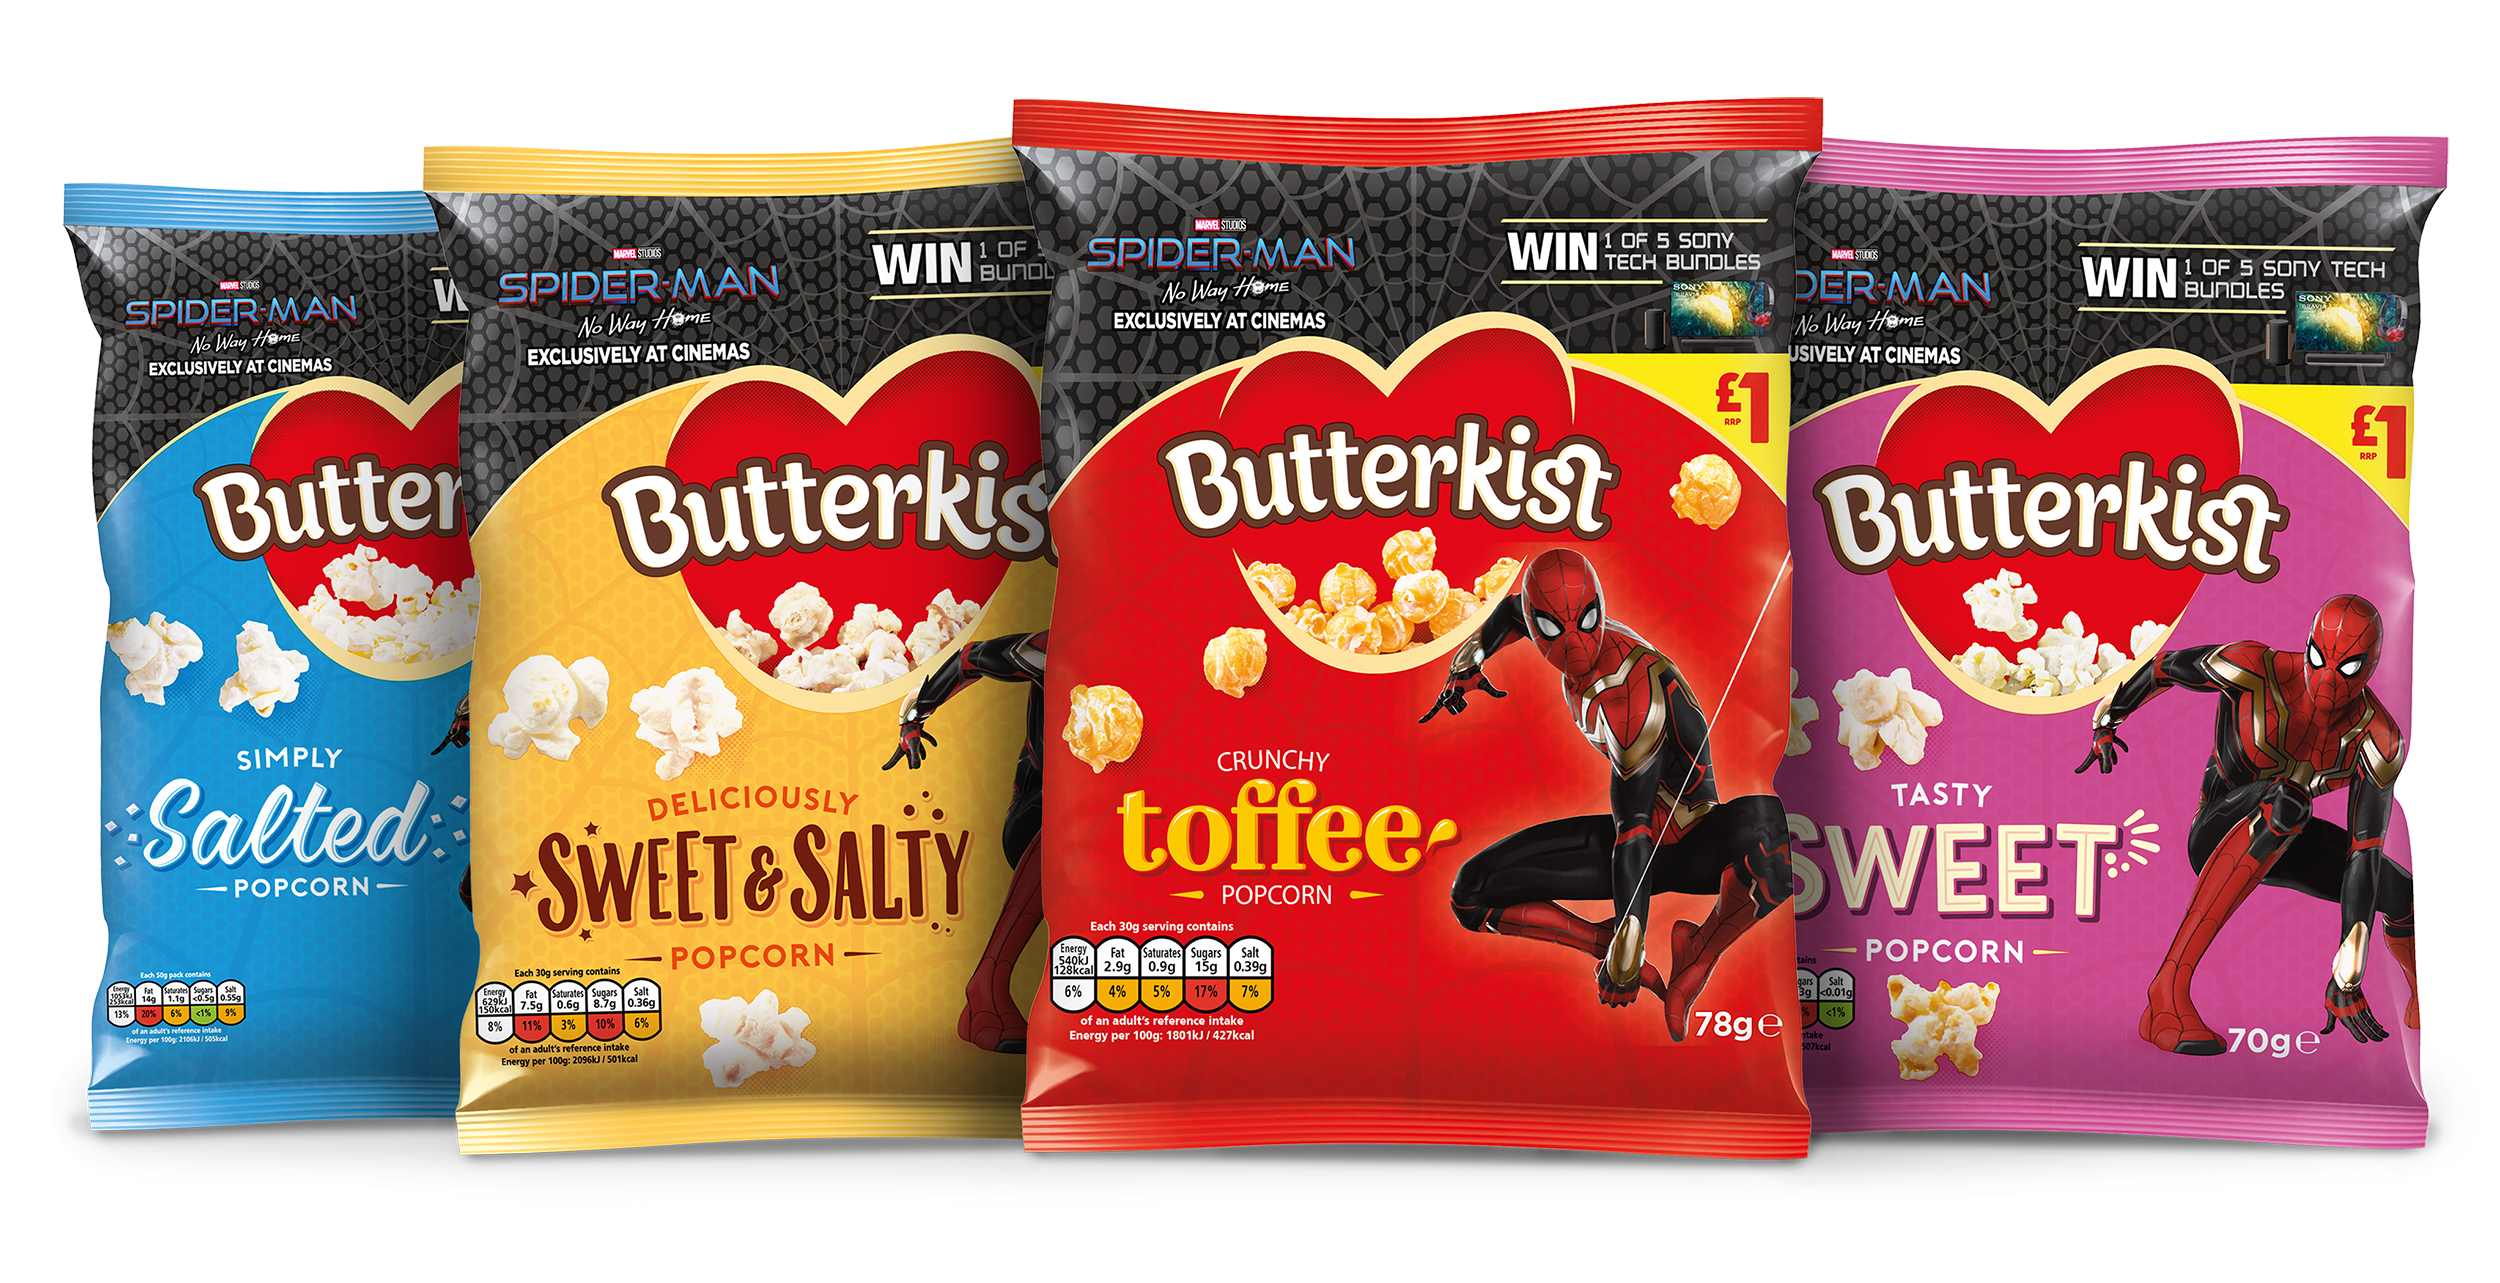 KP Snacks announces Butterkist collaboration upcoming Spider-Man movie